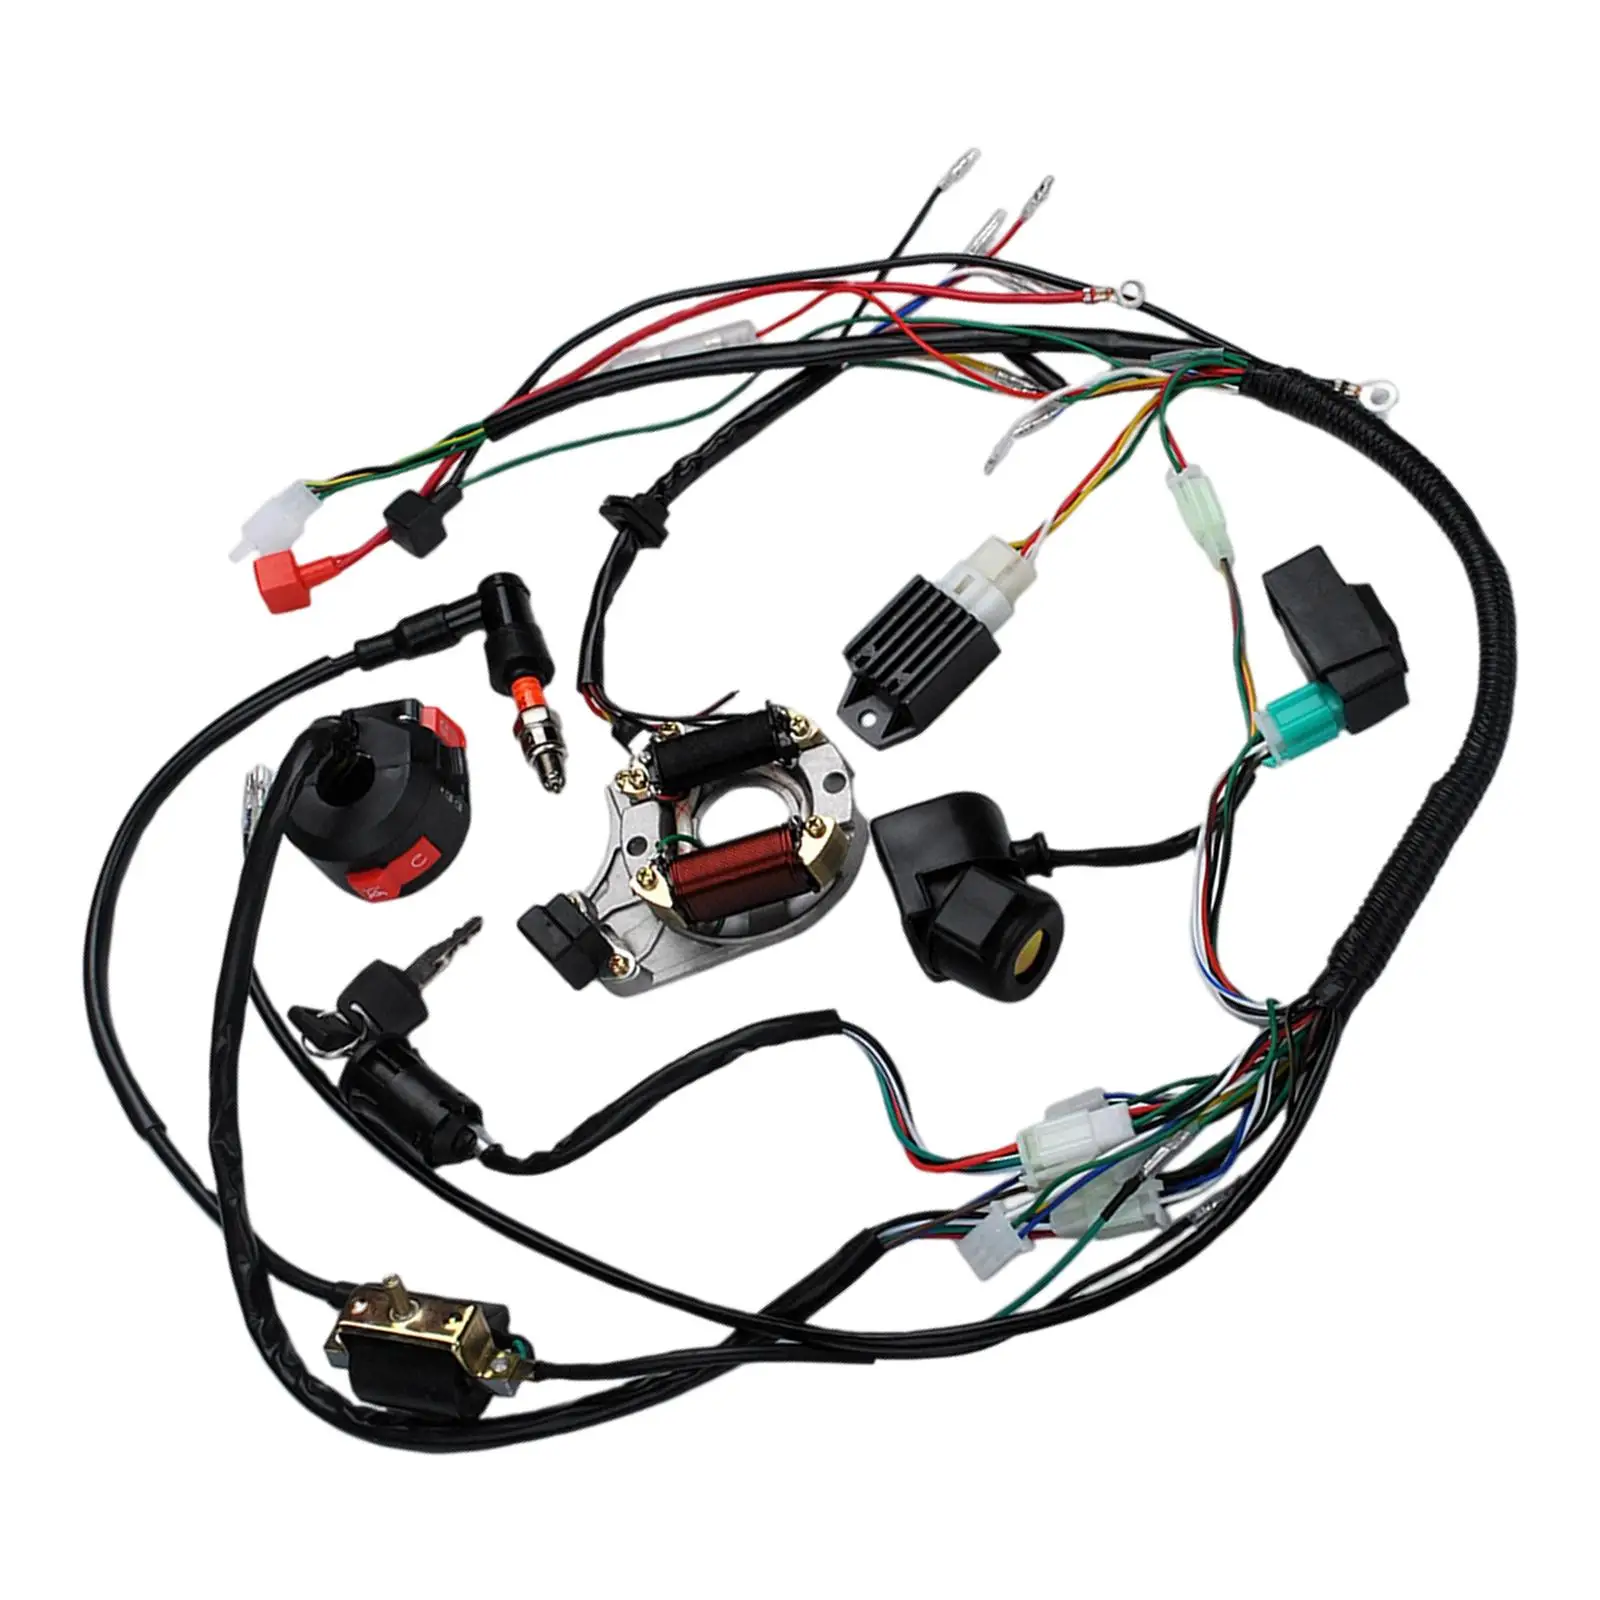 Complete Electrics Wire Harness Kit for Motorcycle 4 Wheelers Stroke